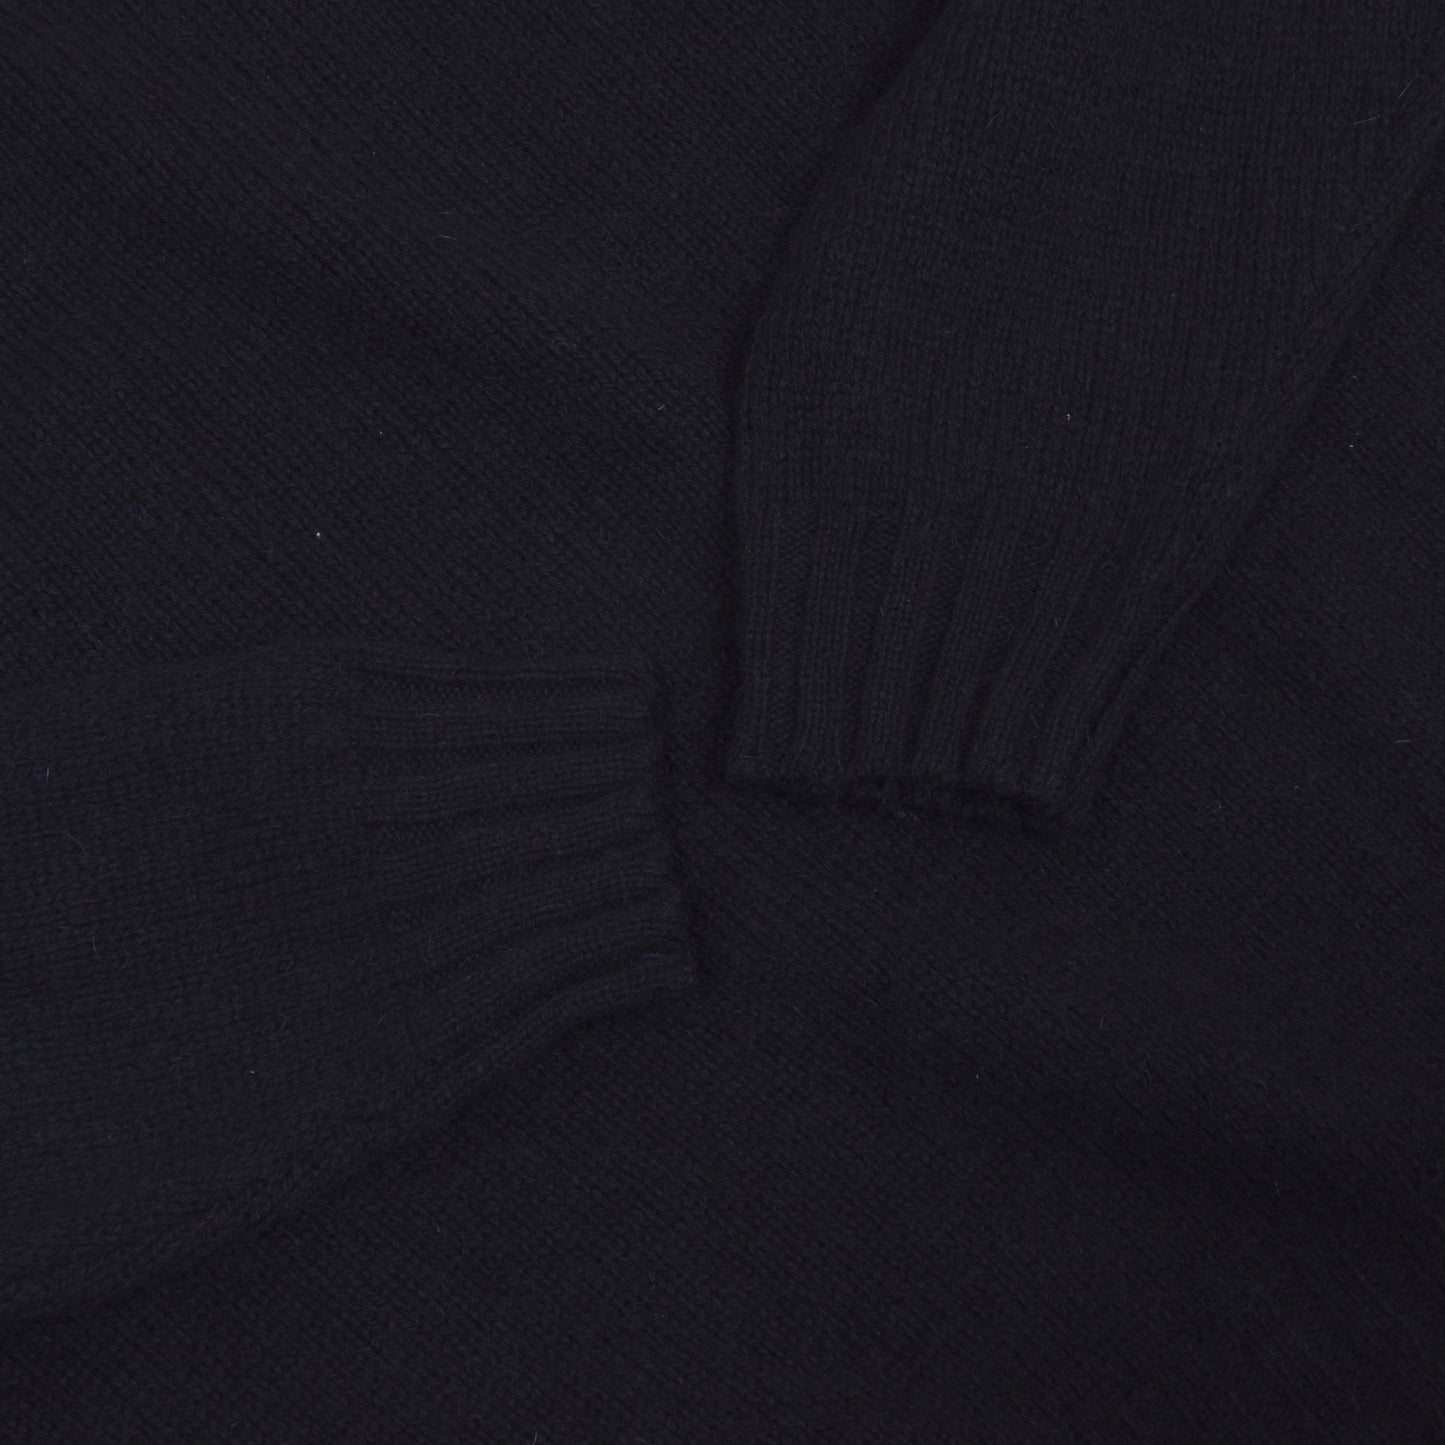 Burberry London Wool Sweater Size S - Navy Blue